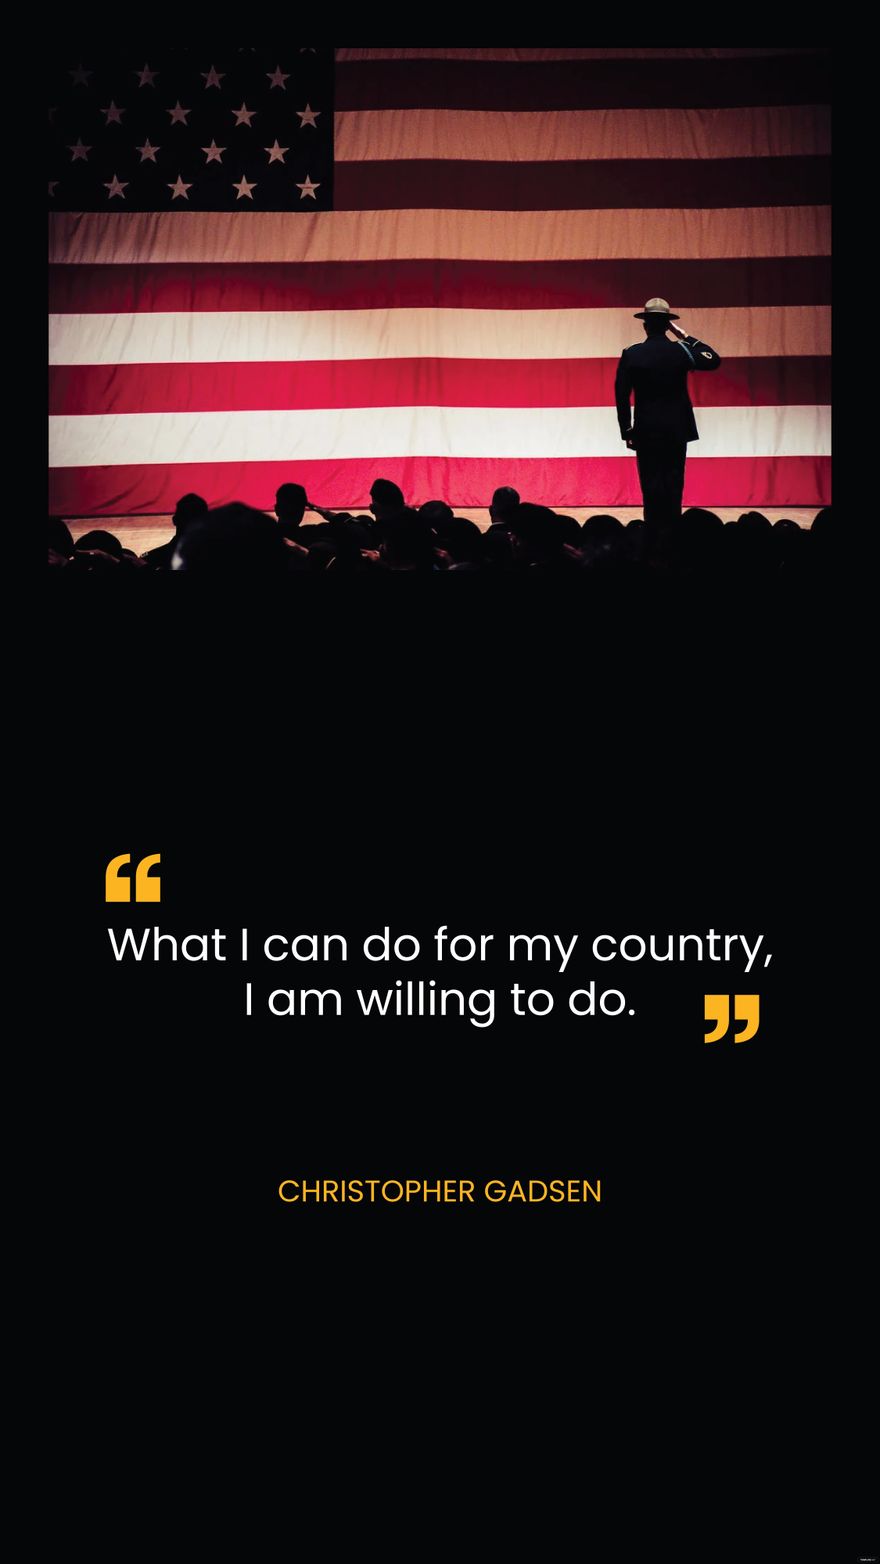 Free Christopher Gadsden - What I can do for my country, I am willing to do. 